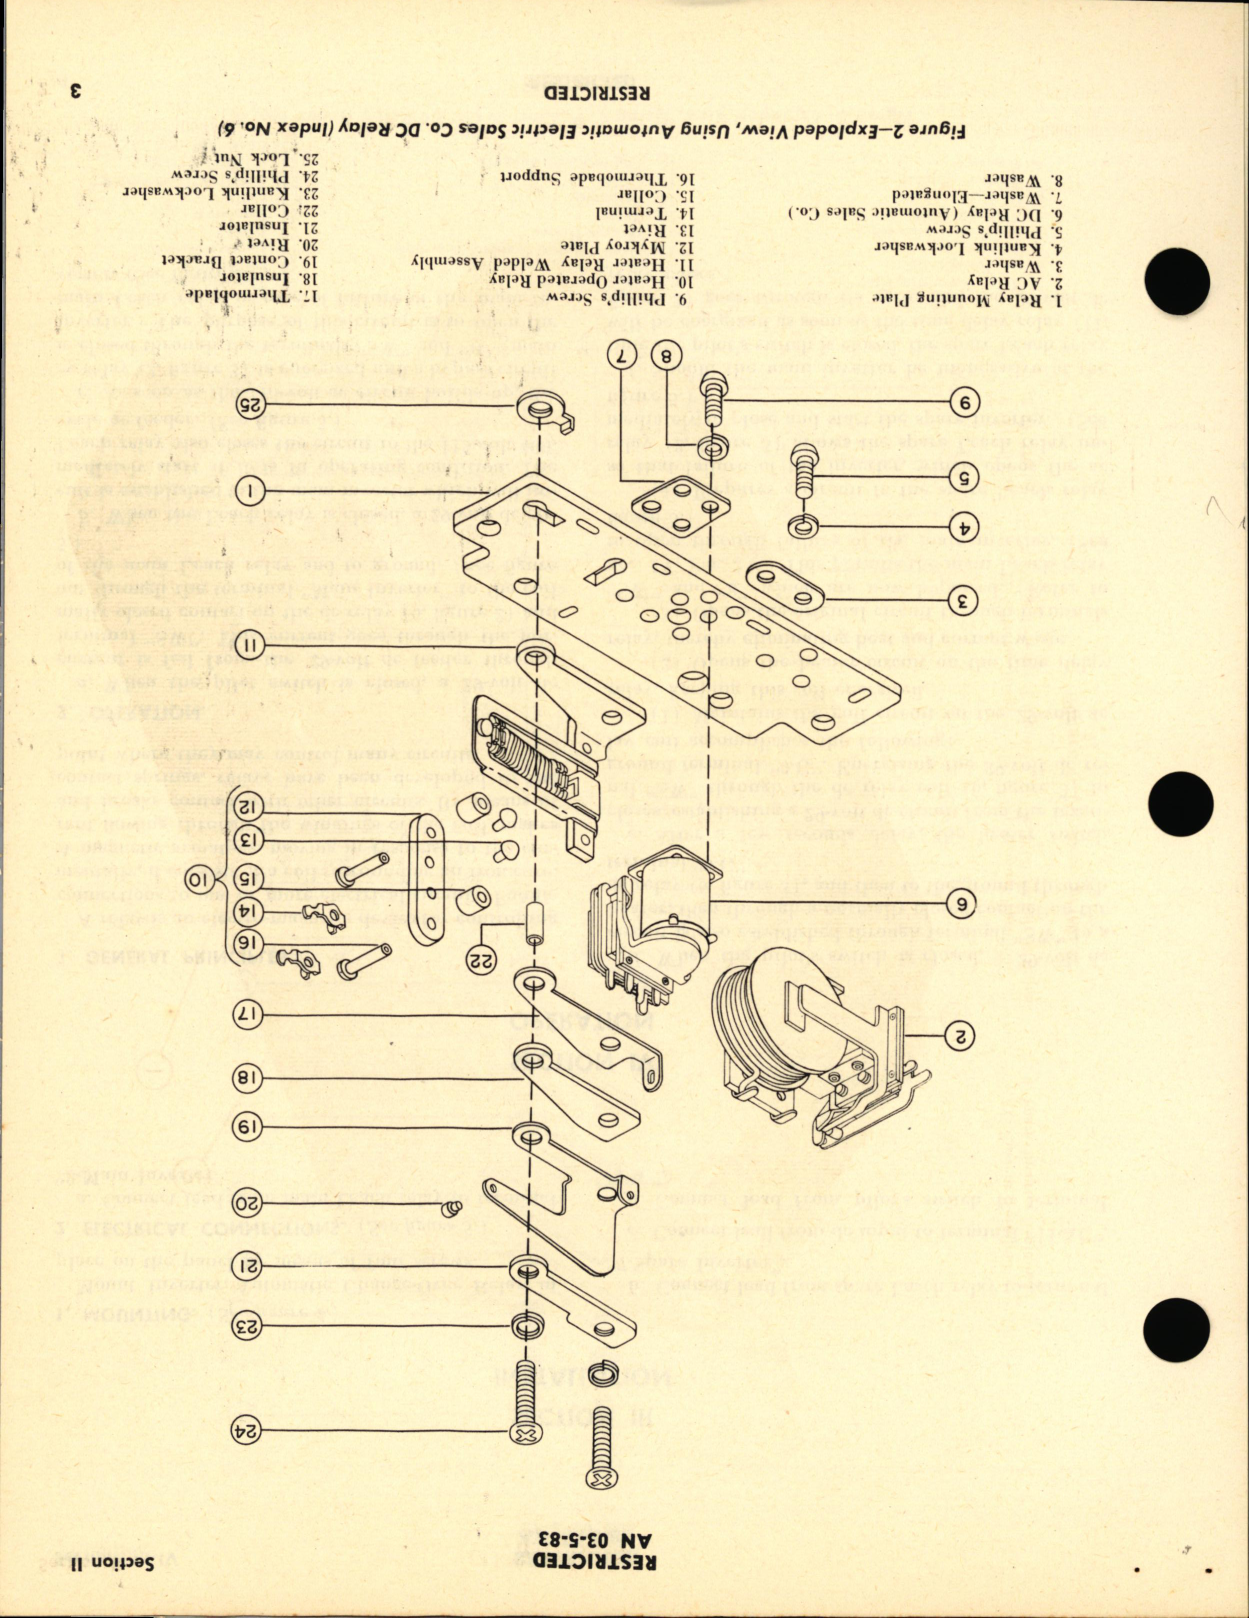 Sample page 7 from AirCorps Library document: Operation, Service & Overhaul Instructions with Parts Catalog for Inverter Automatic Change-Over Relay